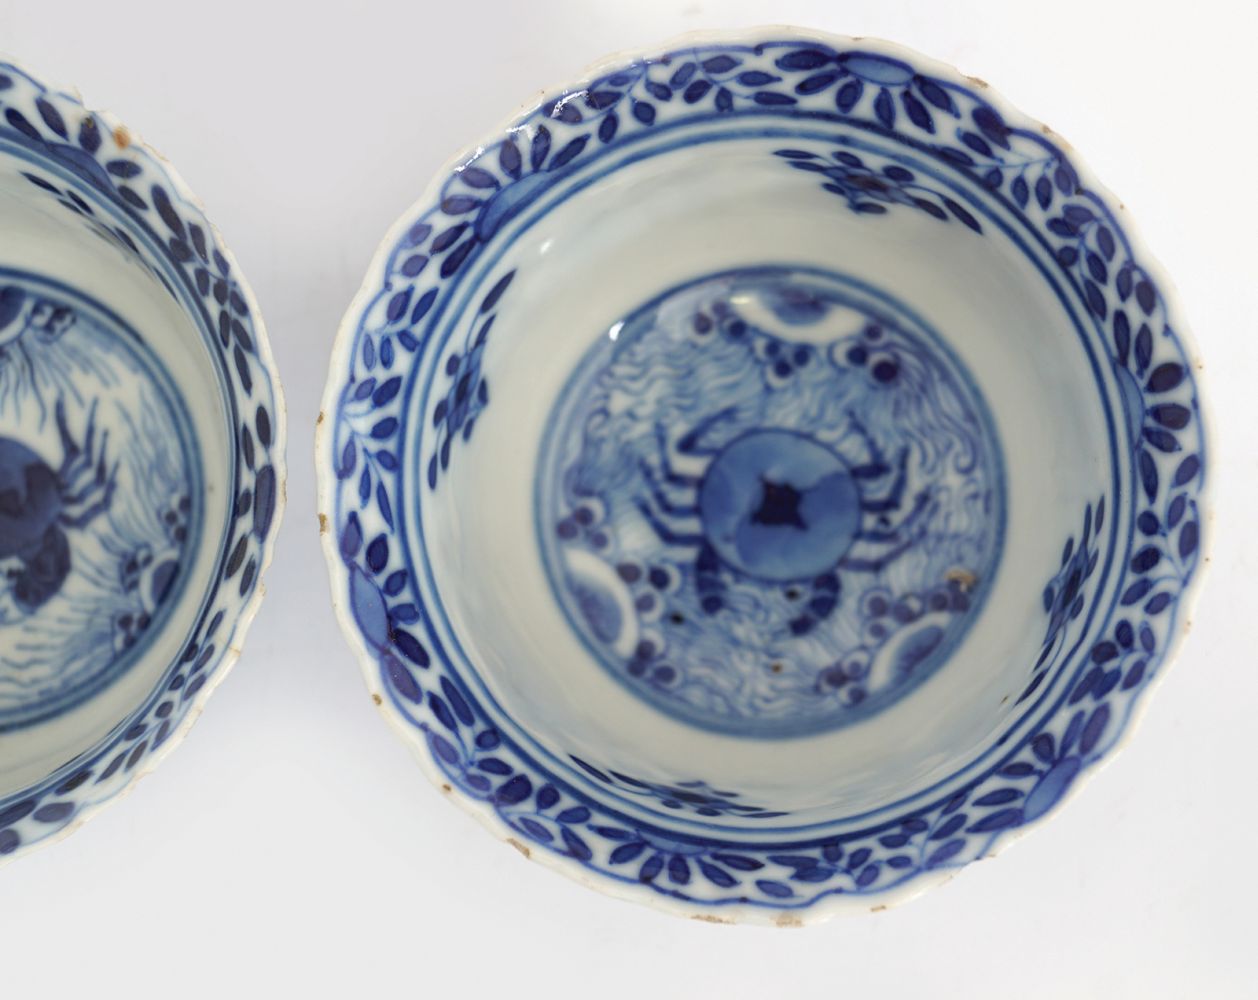 PAIR OF CHINESE BLUE AND WHITE FISHBOWLS - Image 2 of 7